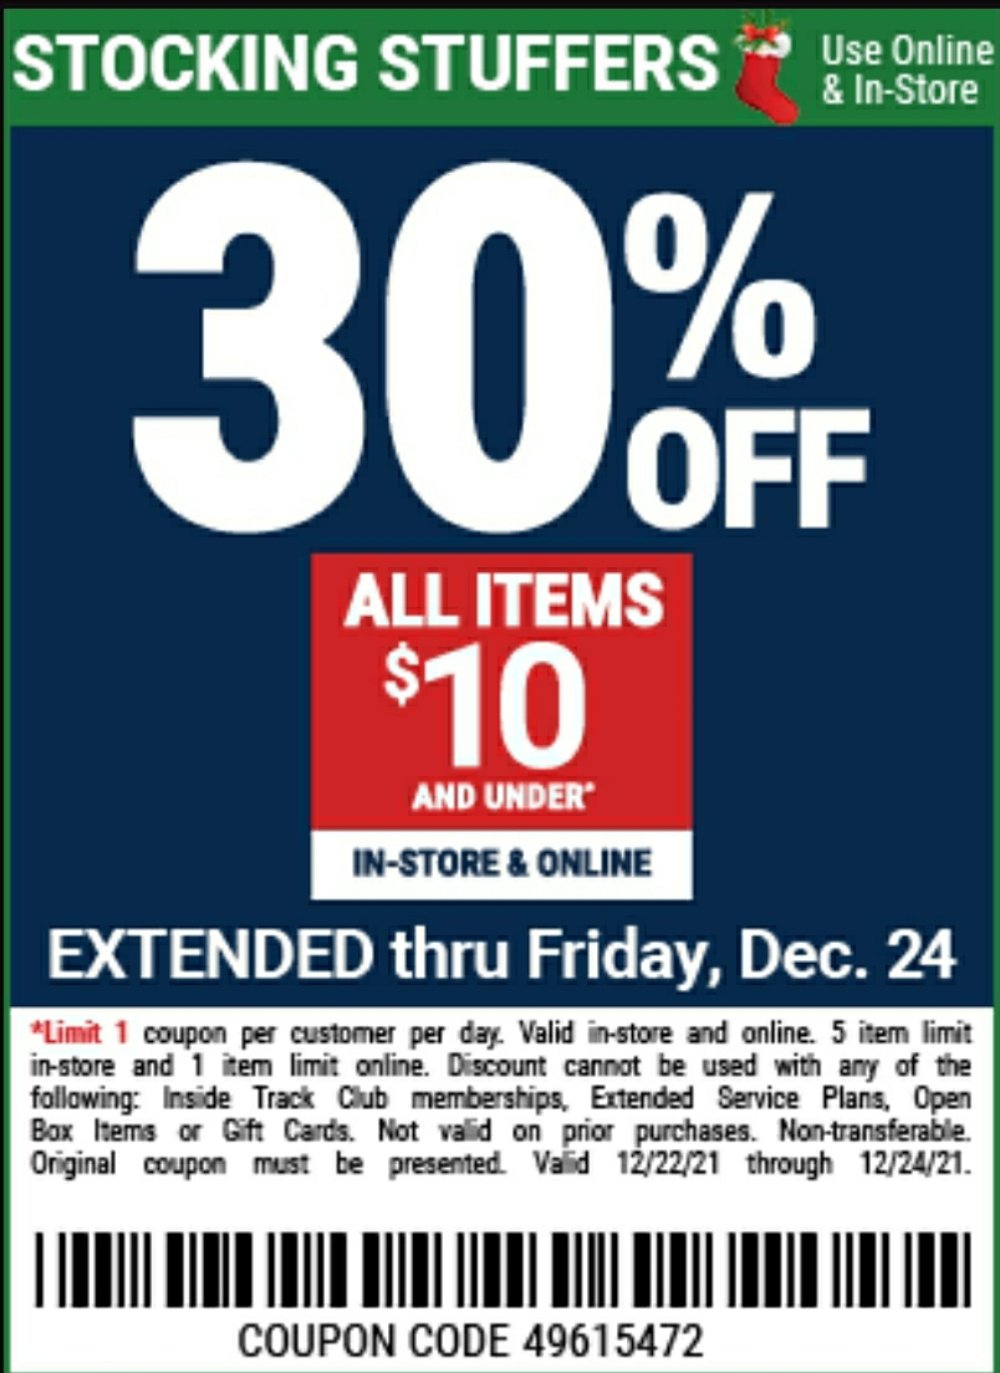 Harbor Freight Coupon, HF Coupons - 30% off $10 or less.